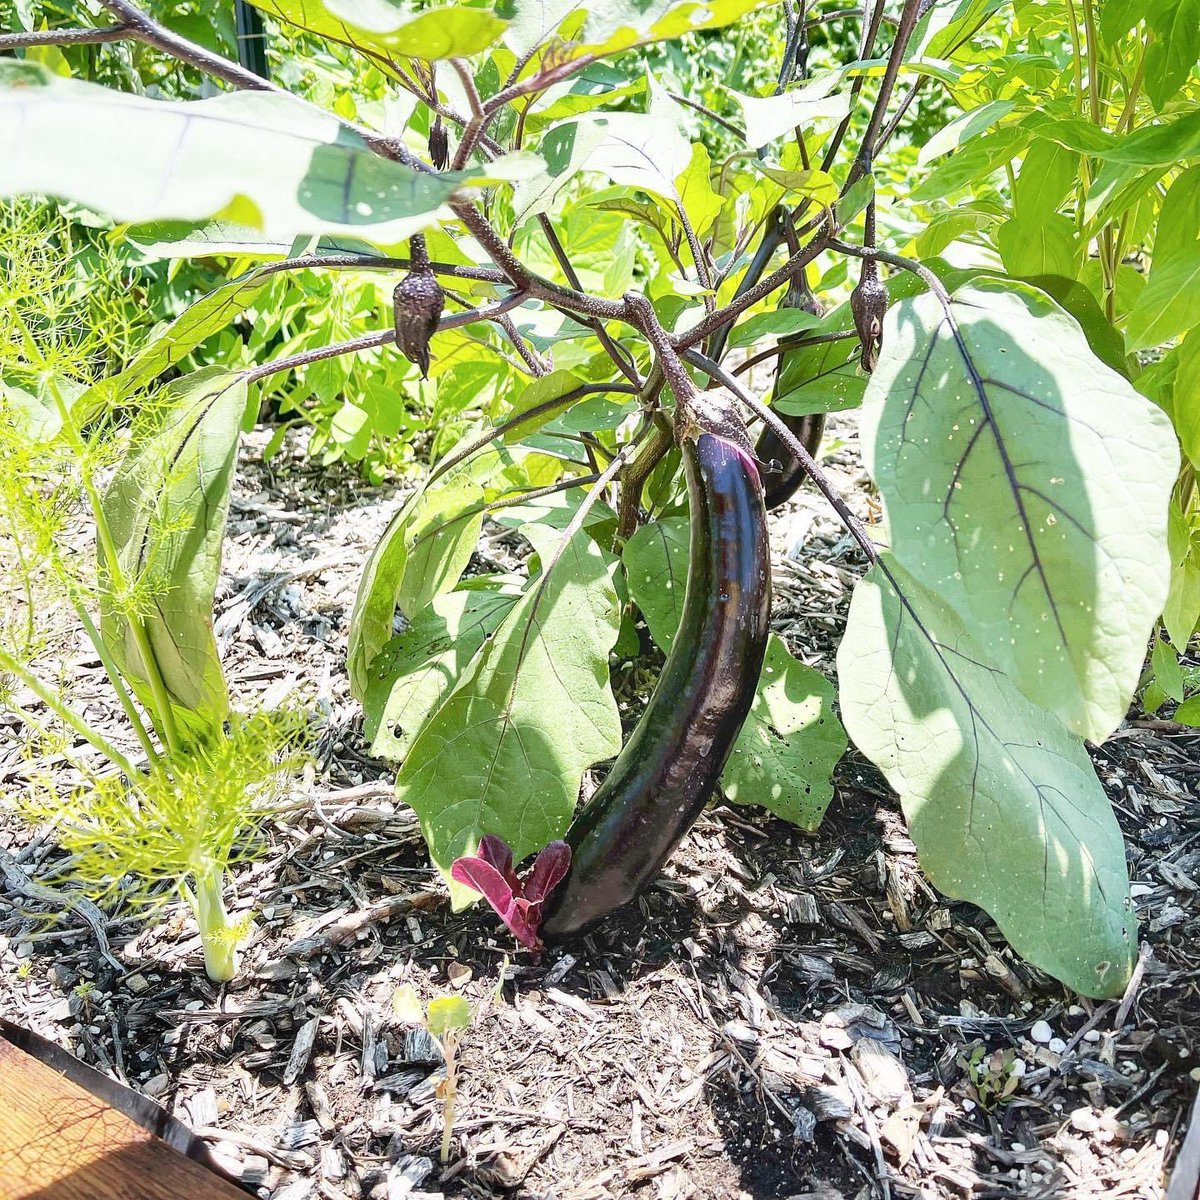 My first eggplant is now producing! 🍆 Seems like things are growing now in the garden & soon will be ready to create new recipes on our channel☺️ #eggplant 
#urbangardening #Raisedbedgardening #backyardgarden #cleanfood #texasgardening #gardening #vegetablegarden #homegrownfood